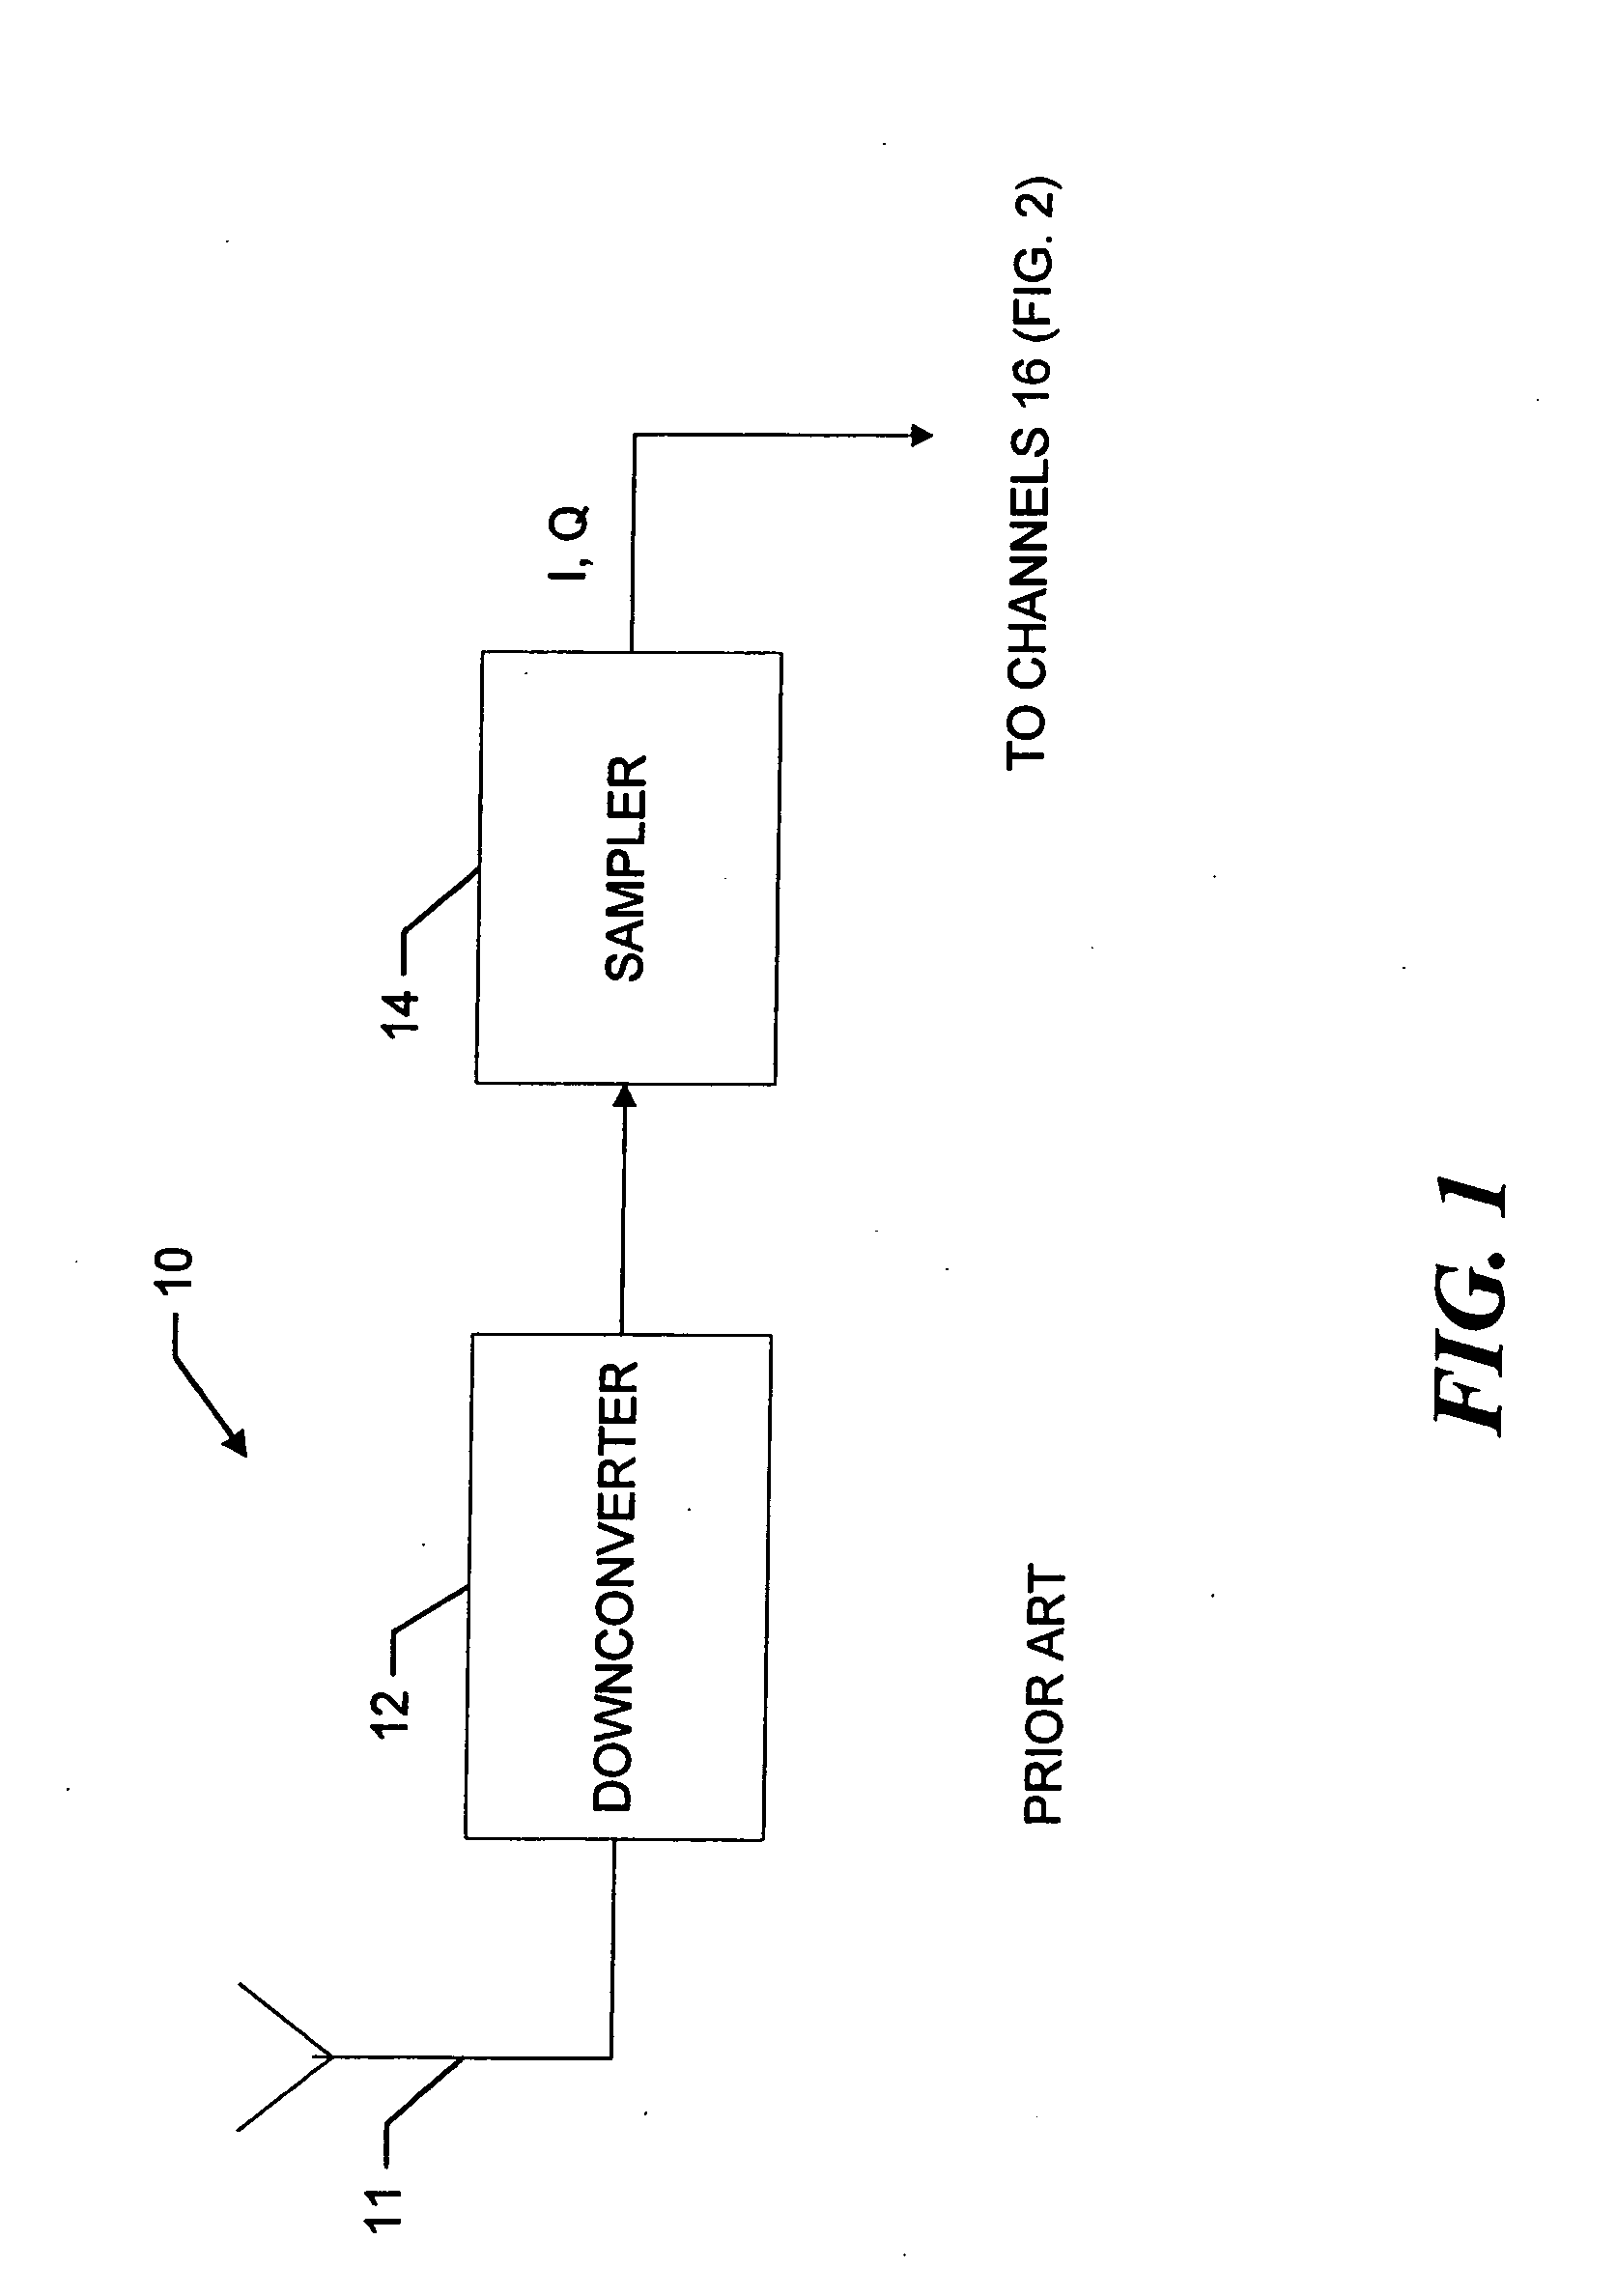 Apparatus for and method of determining quadrature code timing from pulse-shape measurements made using an in-phase code